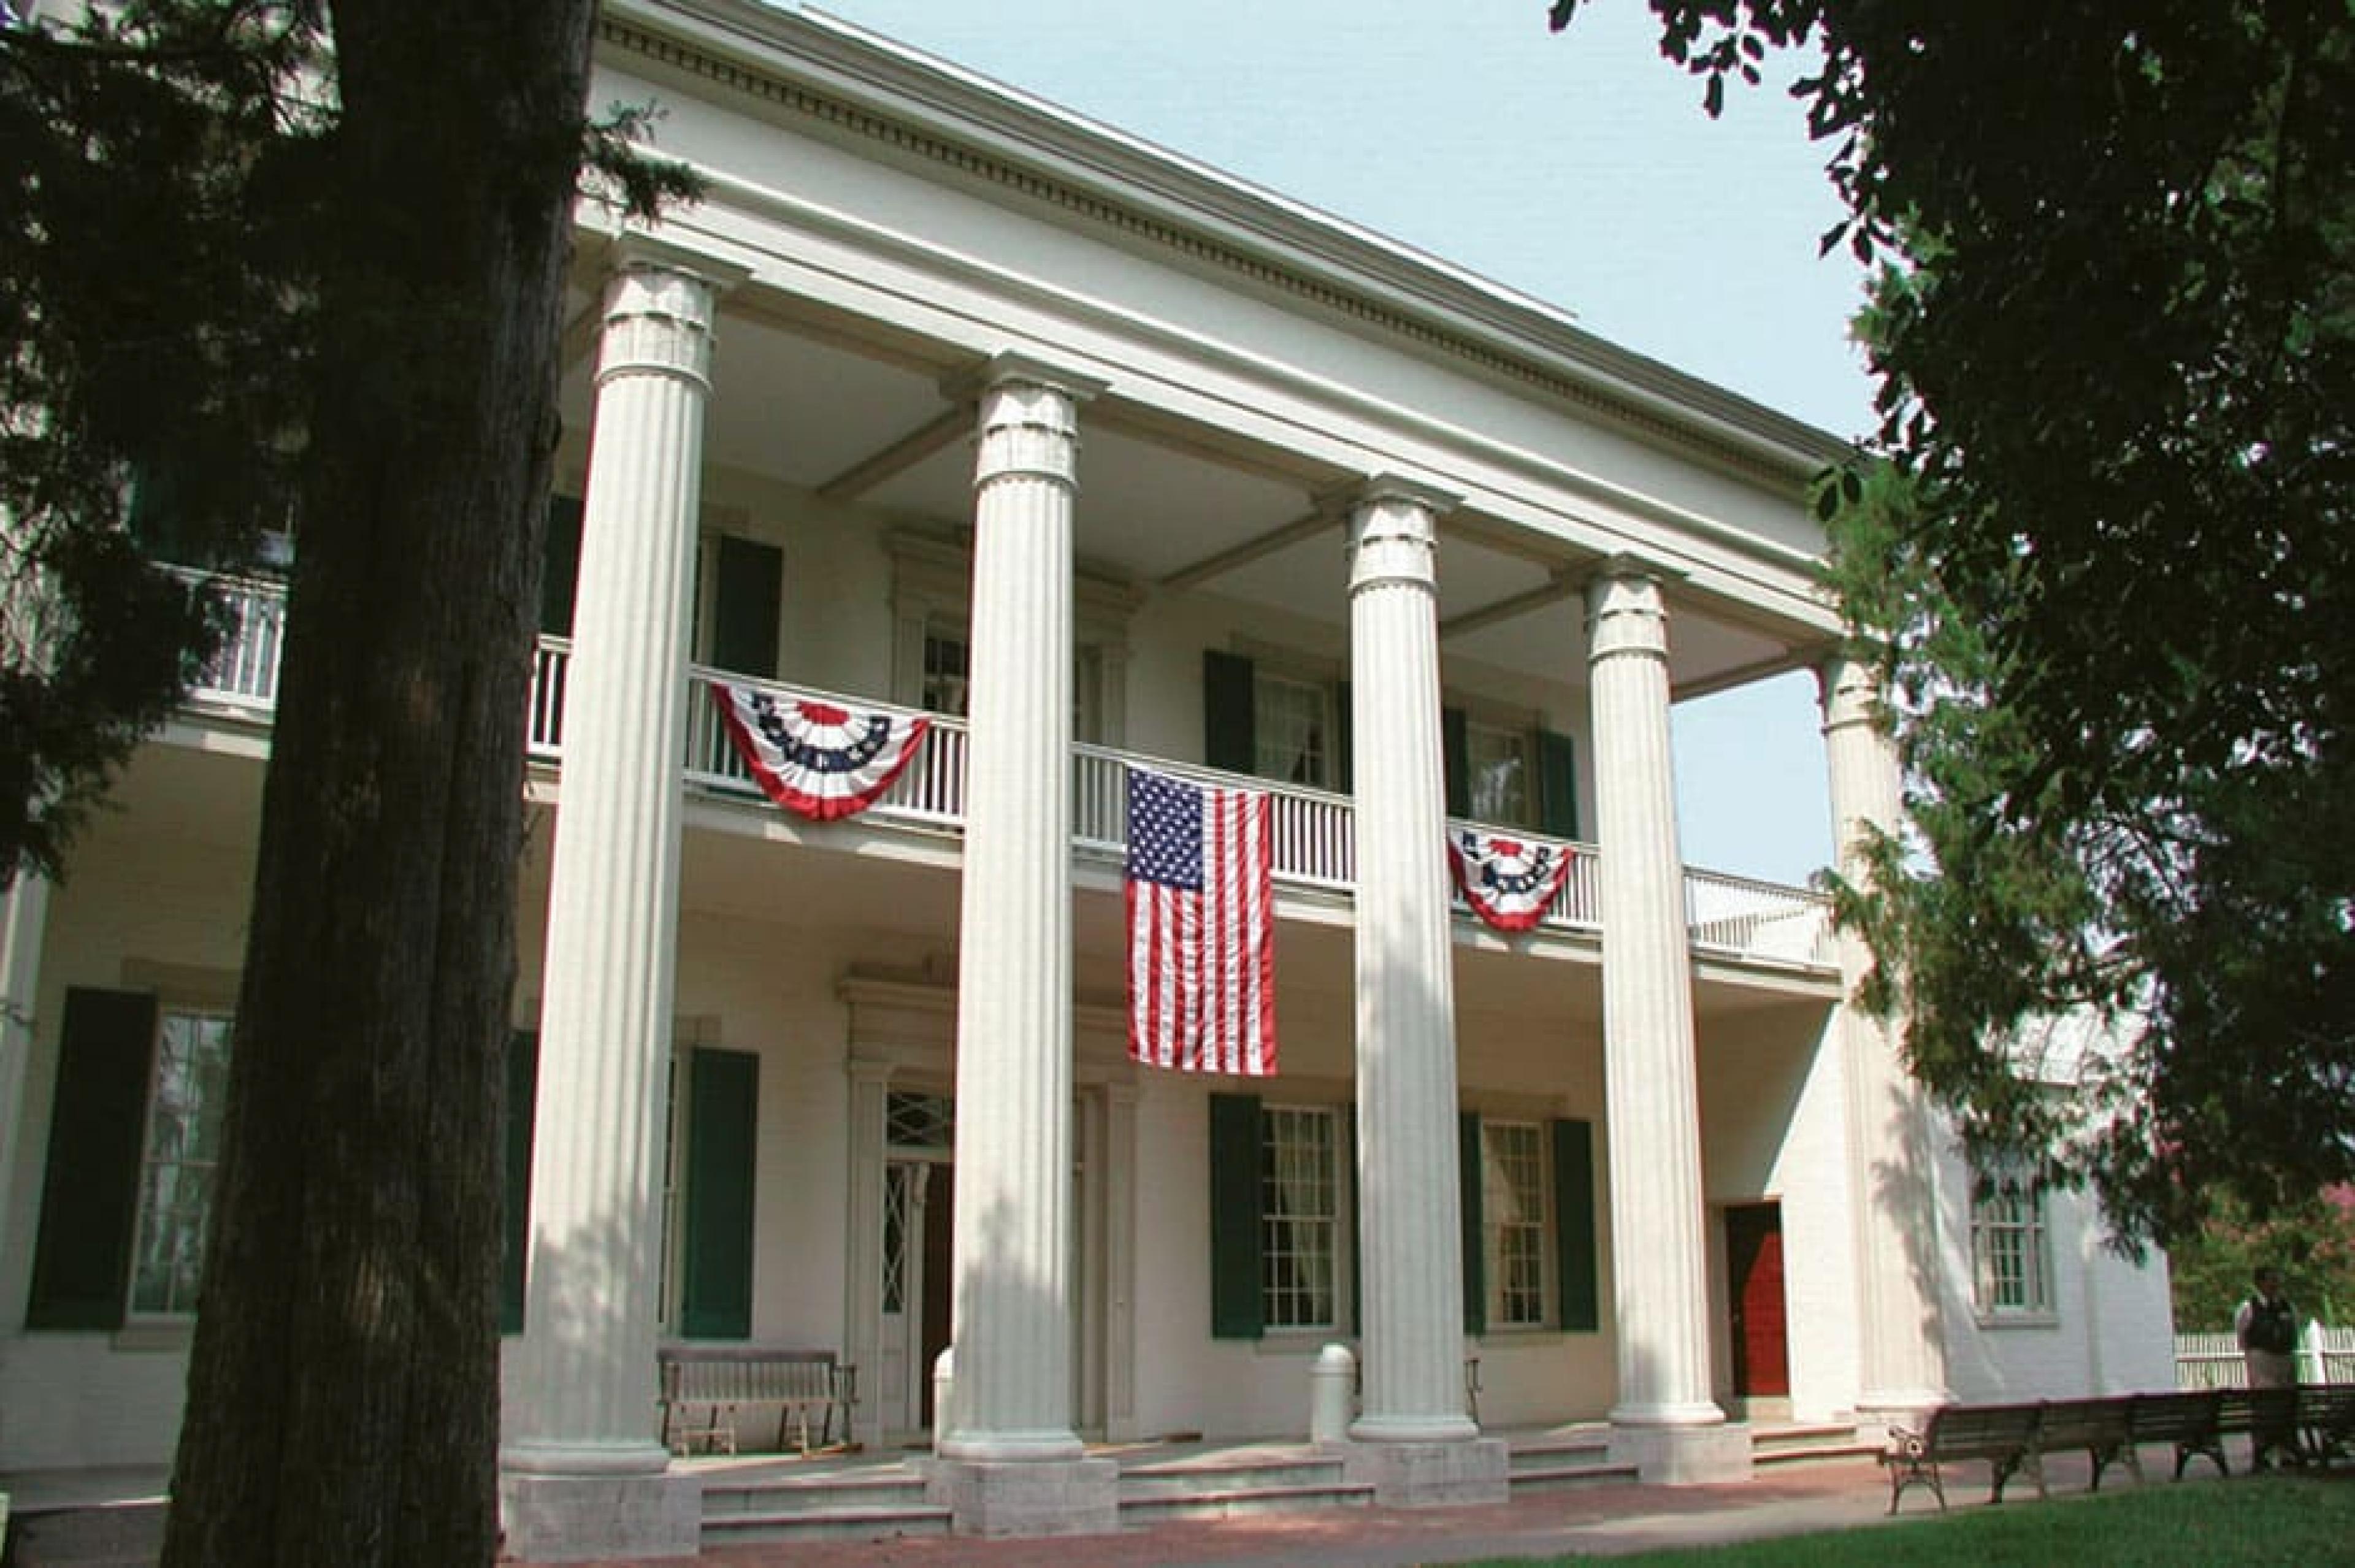 Exterior Veiw - The Hermitage  ,  Nashville, American South Courtesy of the Nashville Convention Corporation